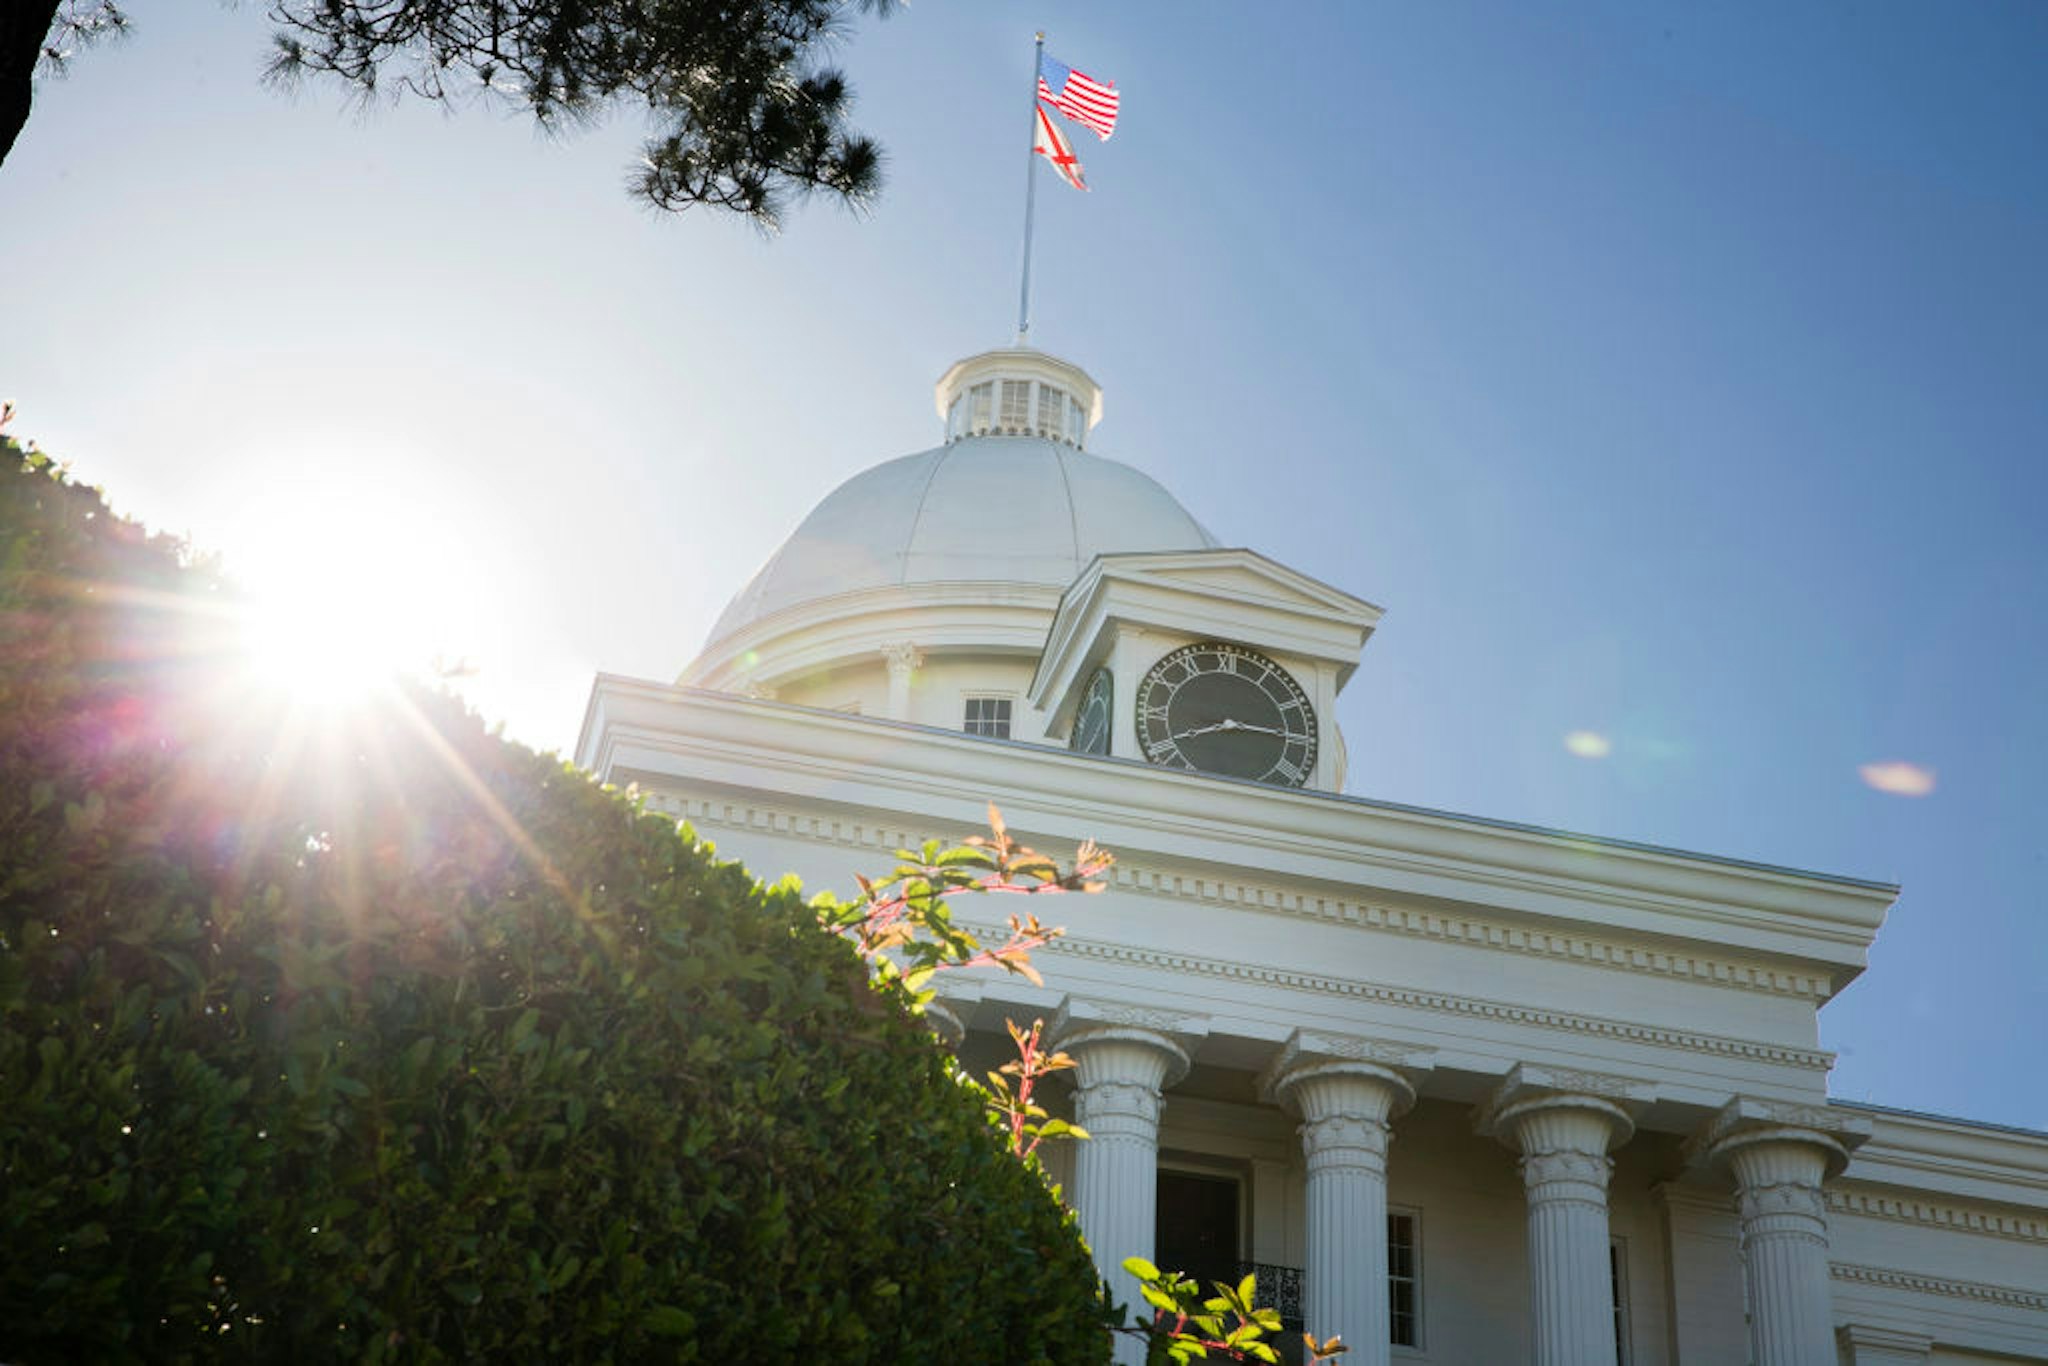 MONTGOMERY, AL - MAY 14- The Alabama State Capitol building is seen on Tuesday, May 14, 2019 in Montgomery, AL. The Alabama state Senate is elected to vote today on a bill that would completely ban abortion in the state.